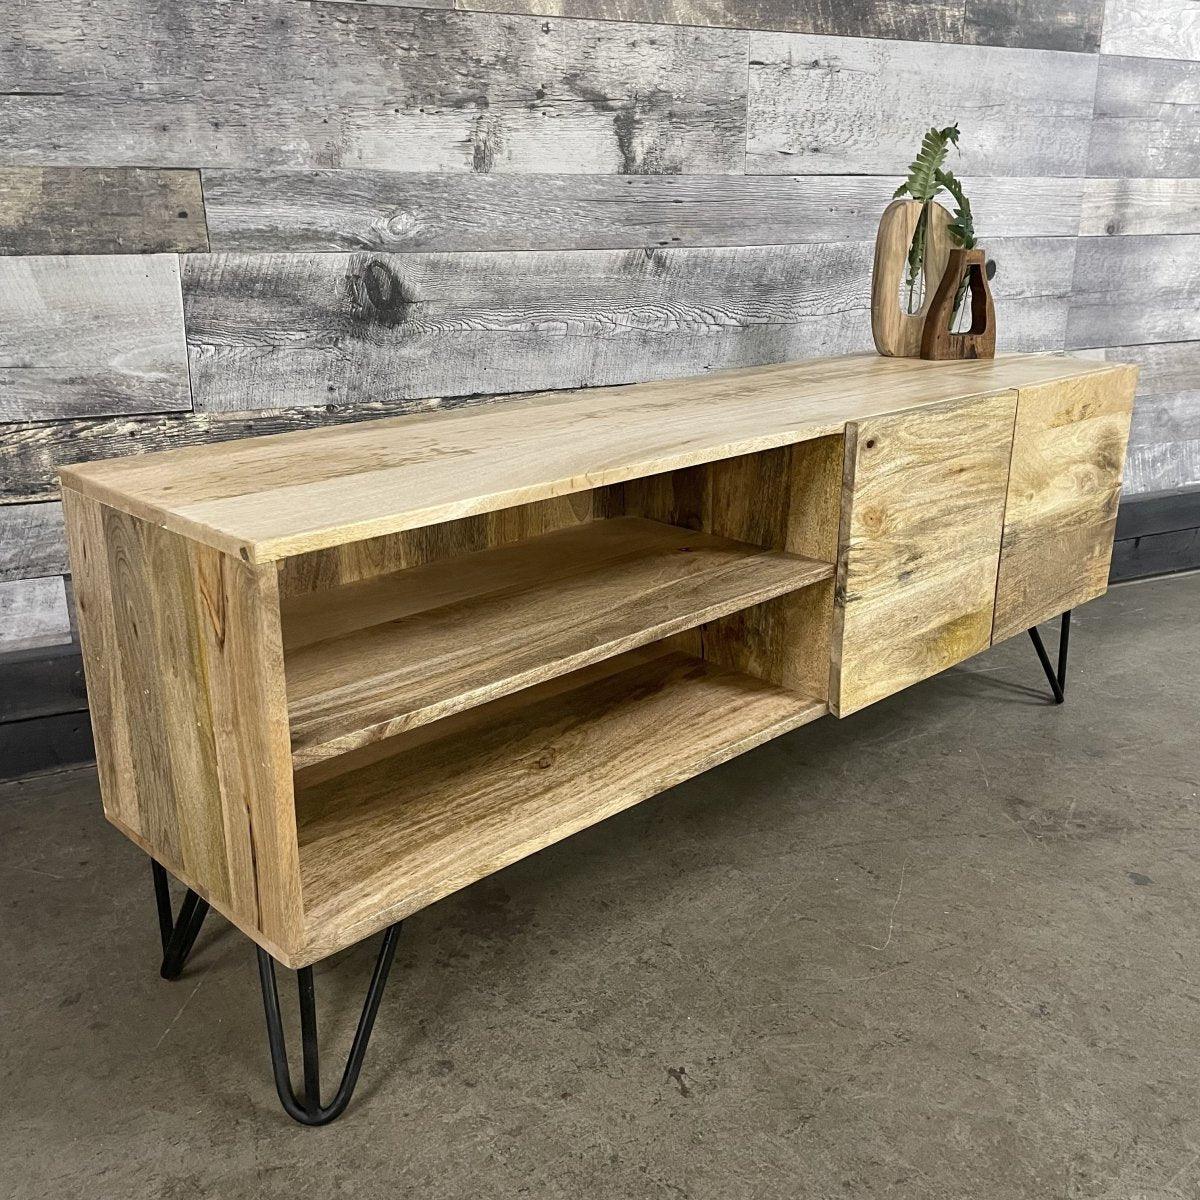 Ostro Mango Wood TV Stand - Rustic Furniture Outlet